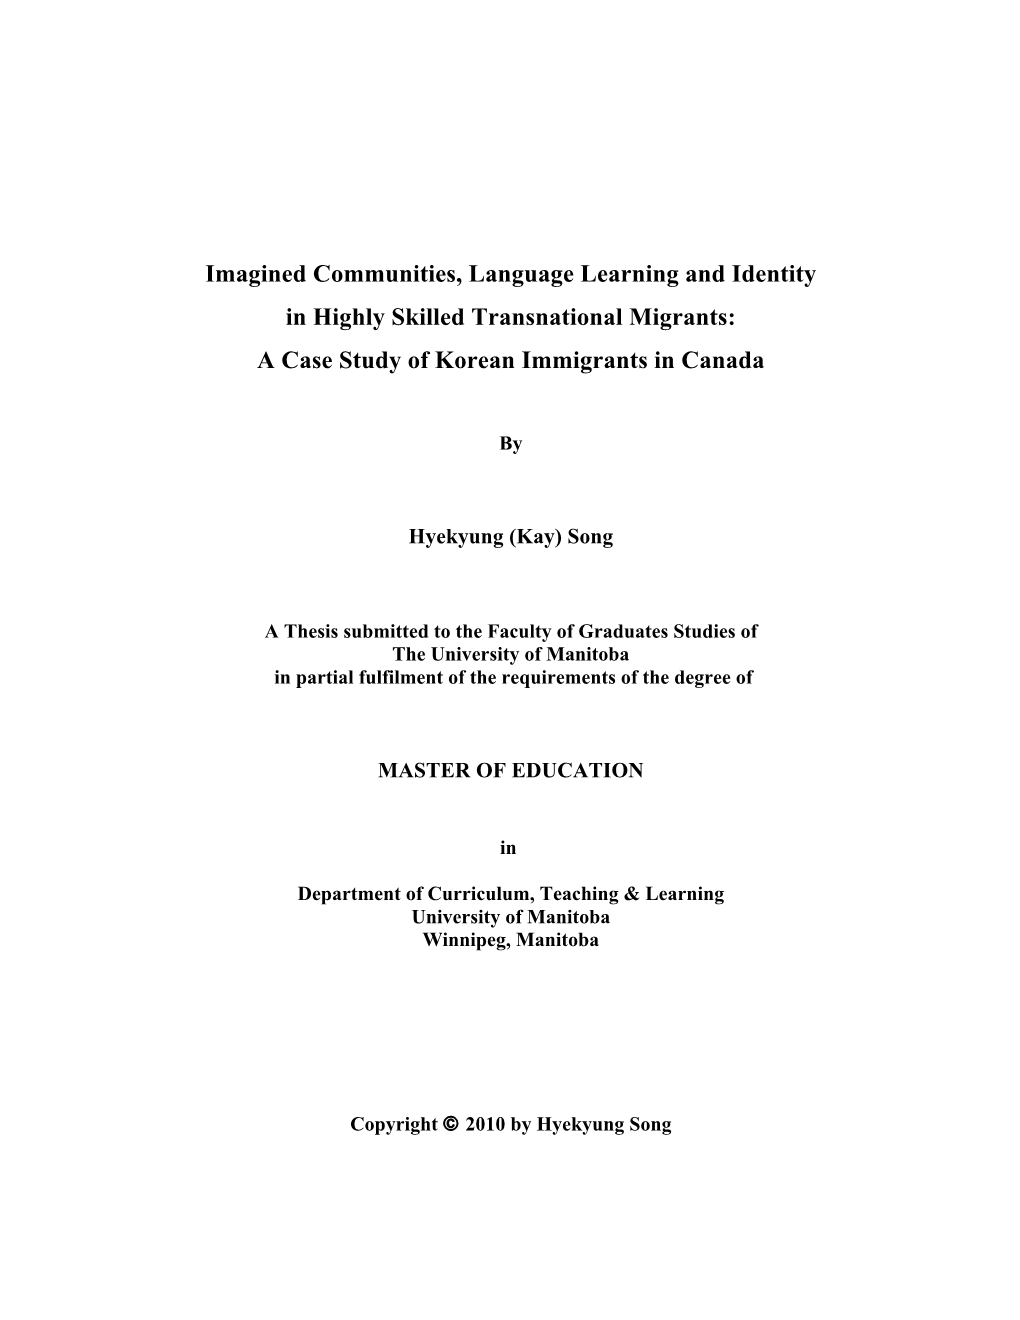 Imagined Communities, Language Learning and Identity in Highly Skilled Transnational Migrants: a Case Study of Korean Immigrants in Canada